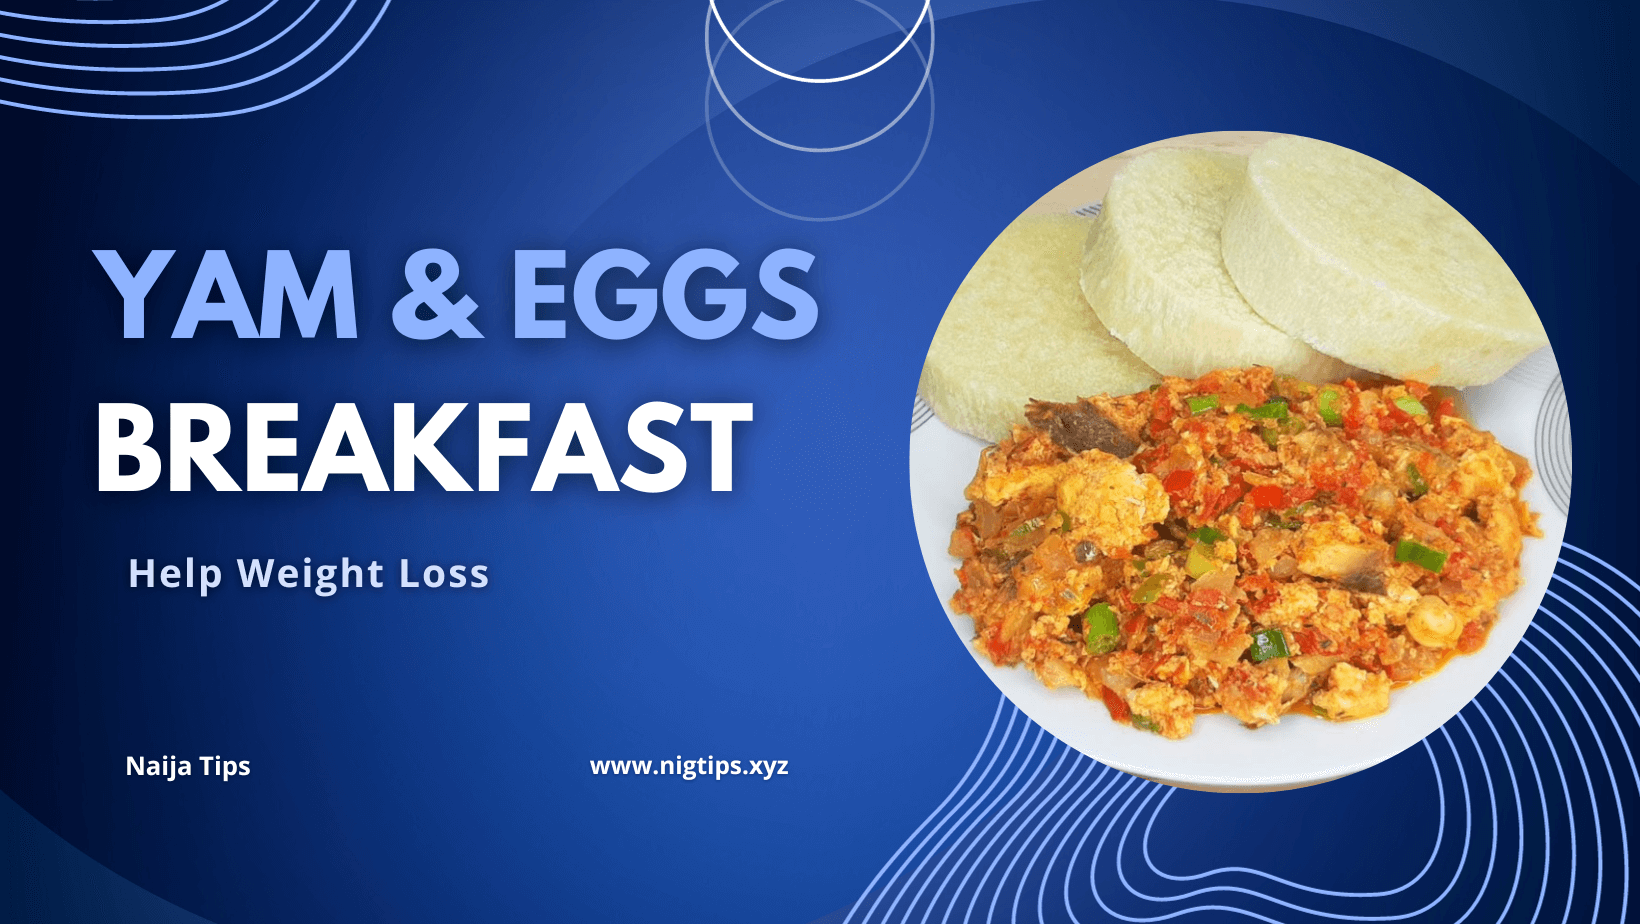 Does Yam and Egg Breakfast Help Weight Loss